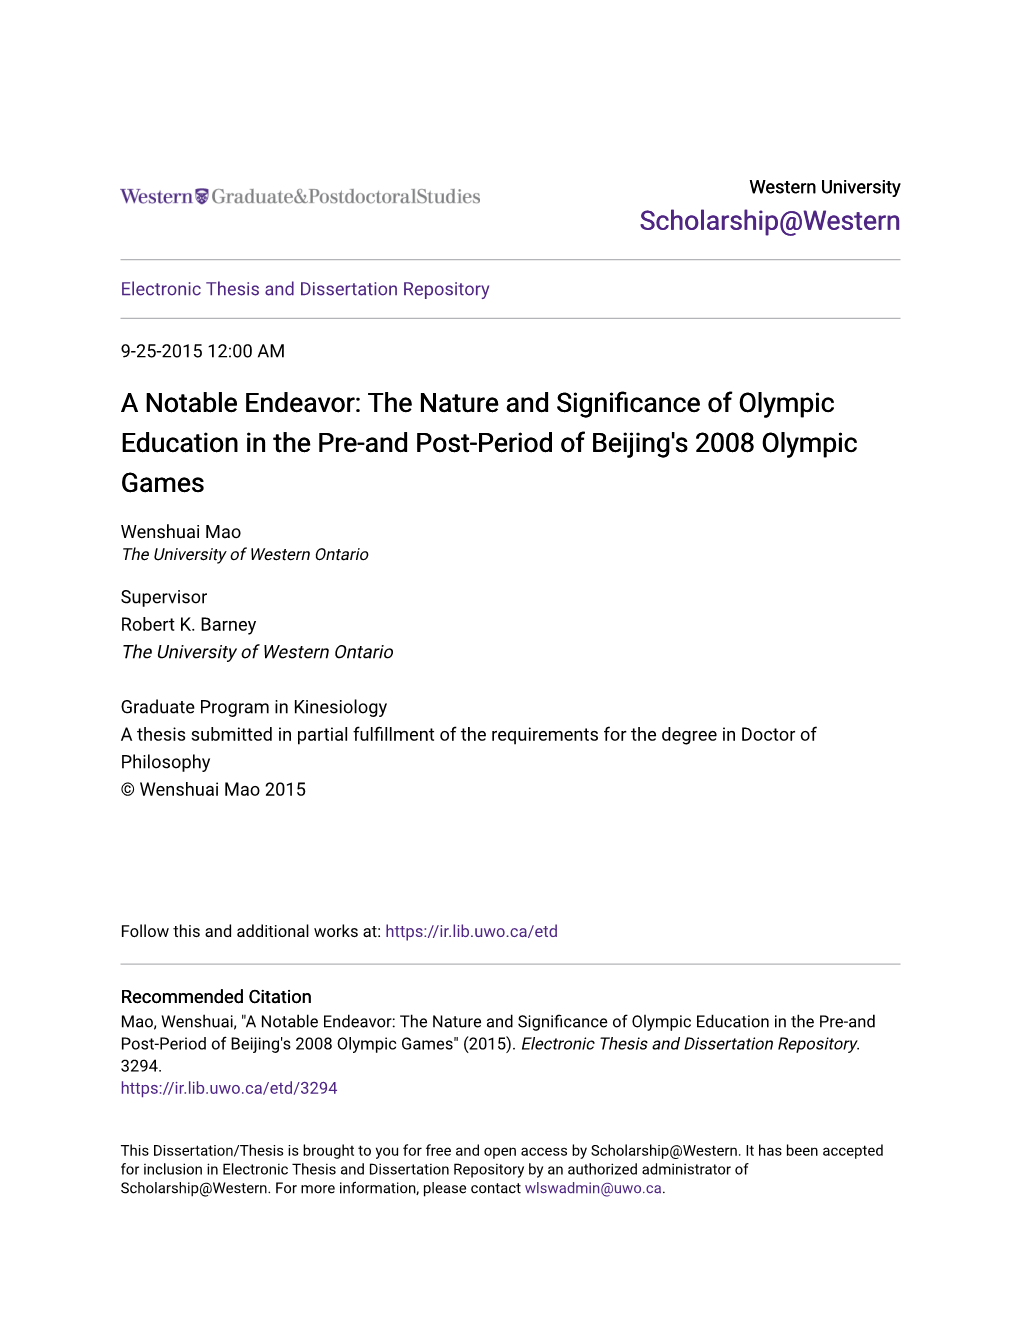 The Nature and Significance of Olympic Education in the Pre-And Post-Period of Beijing's 2008 Olympic Games